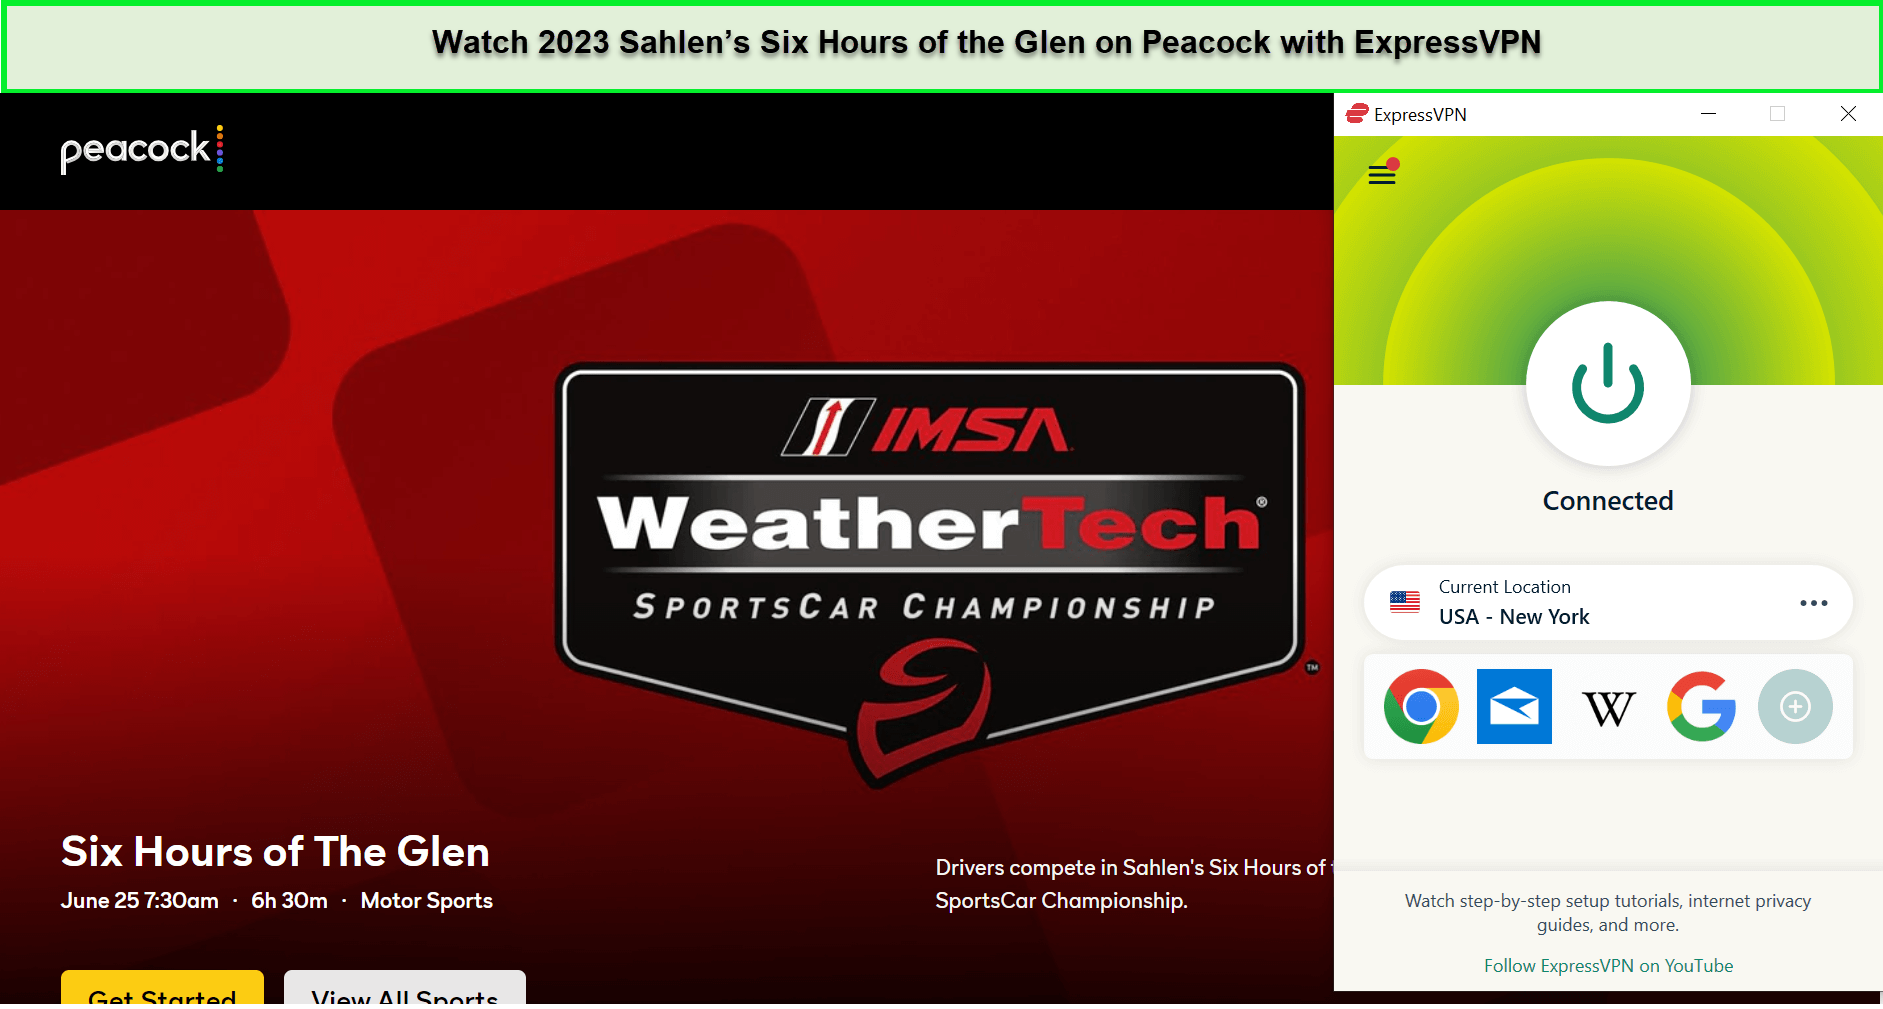 Watch-2023-Sahlens-Six-Hours-of-the-Glen-in-UAE-on-Peacock-with-ExpressVPN